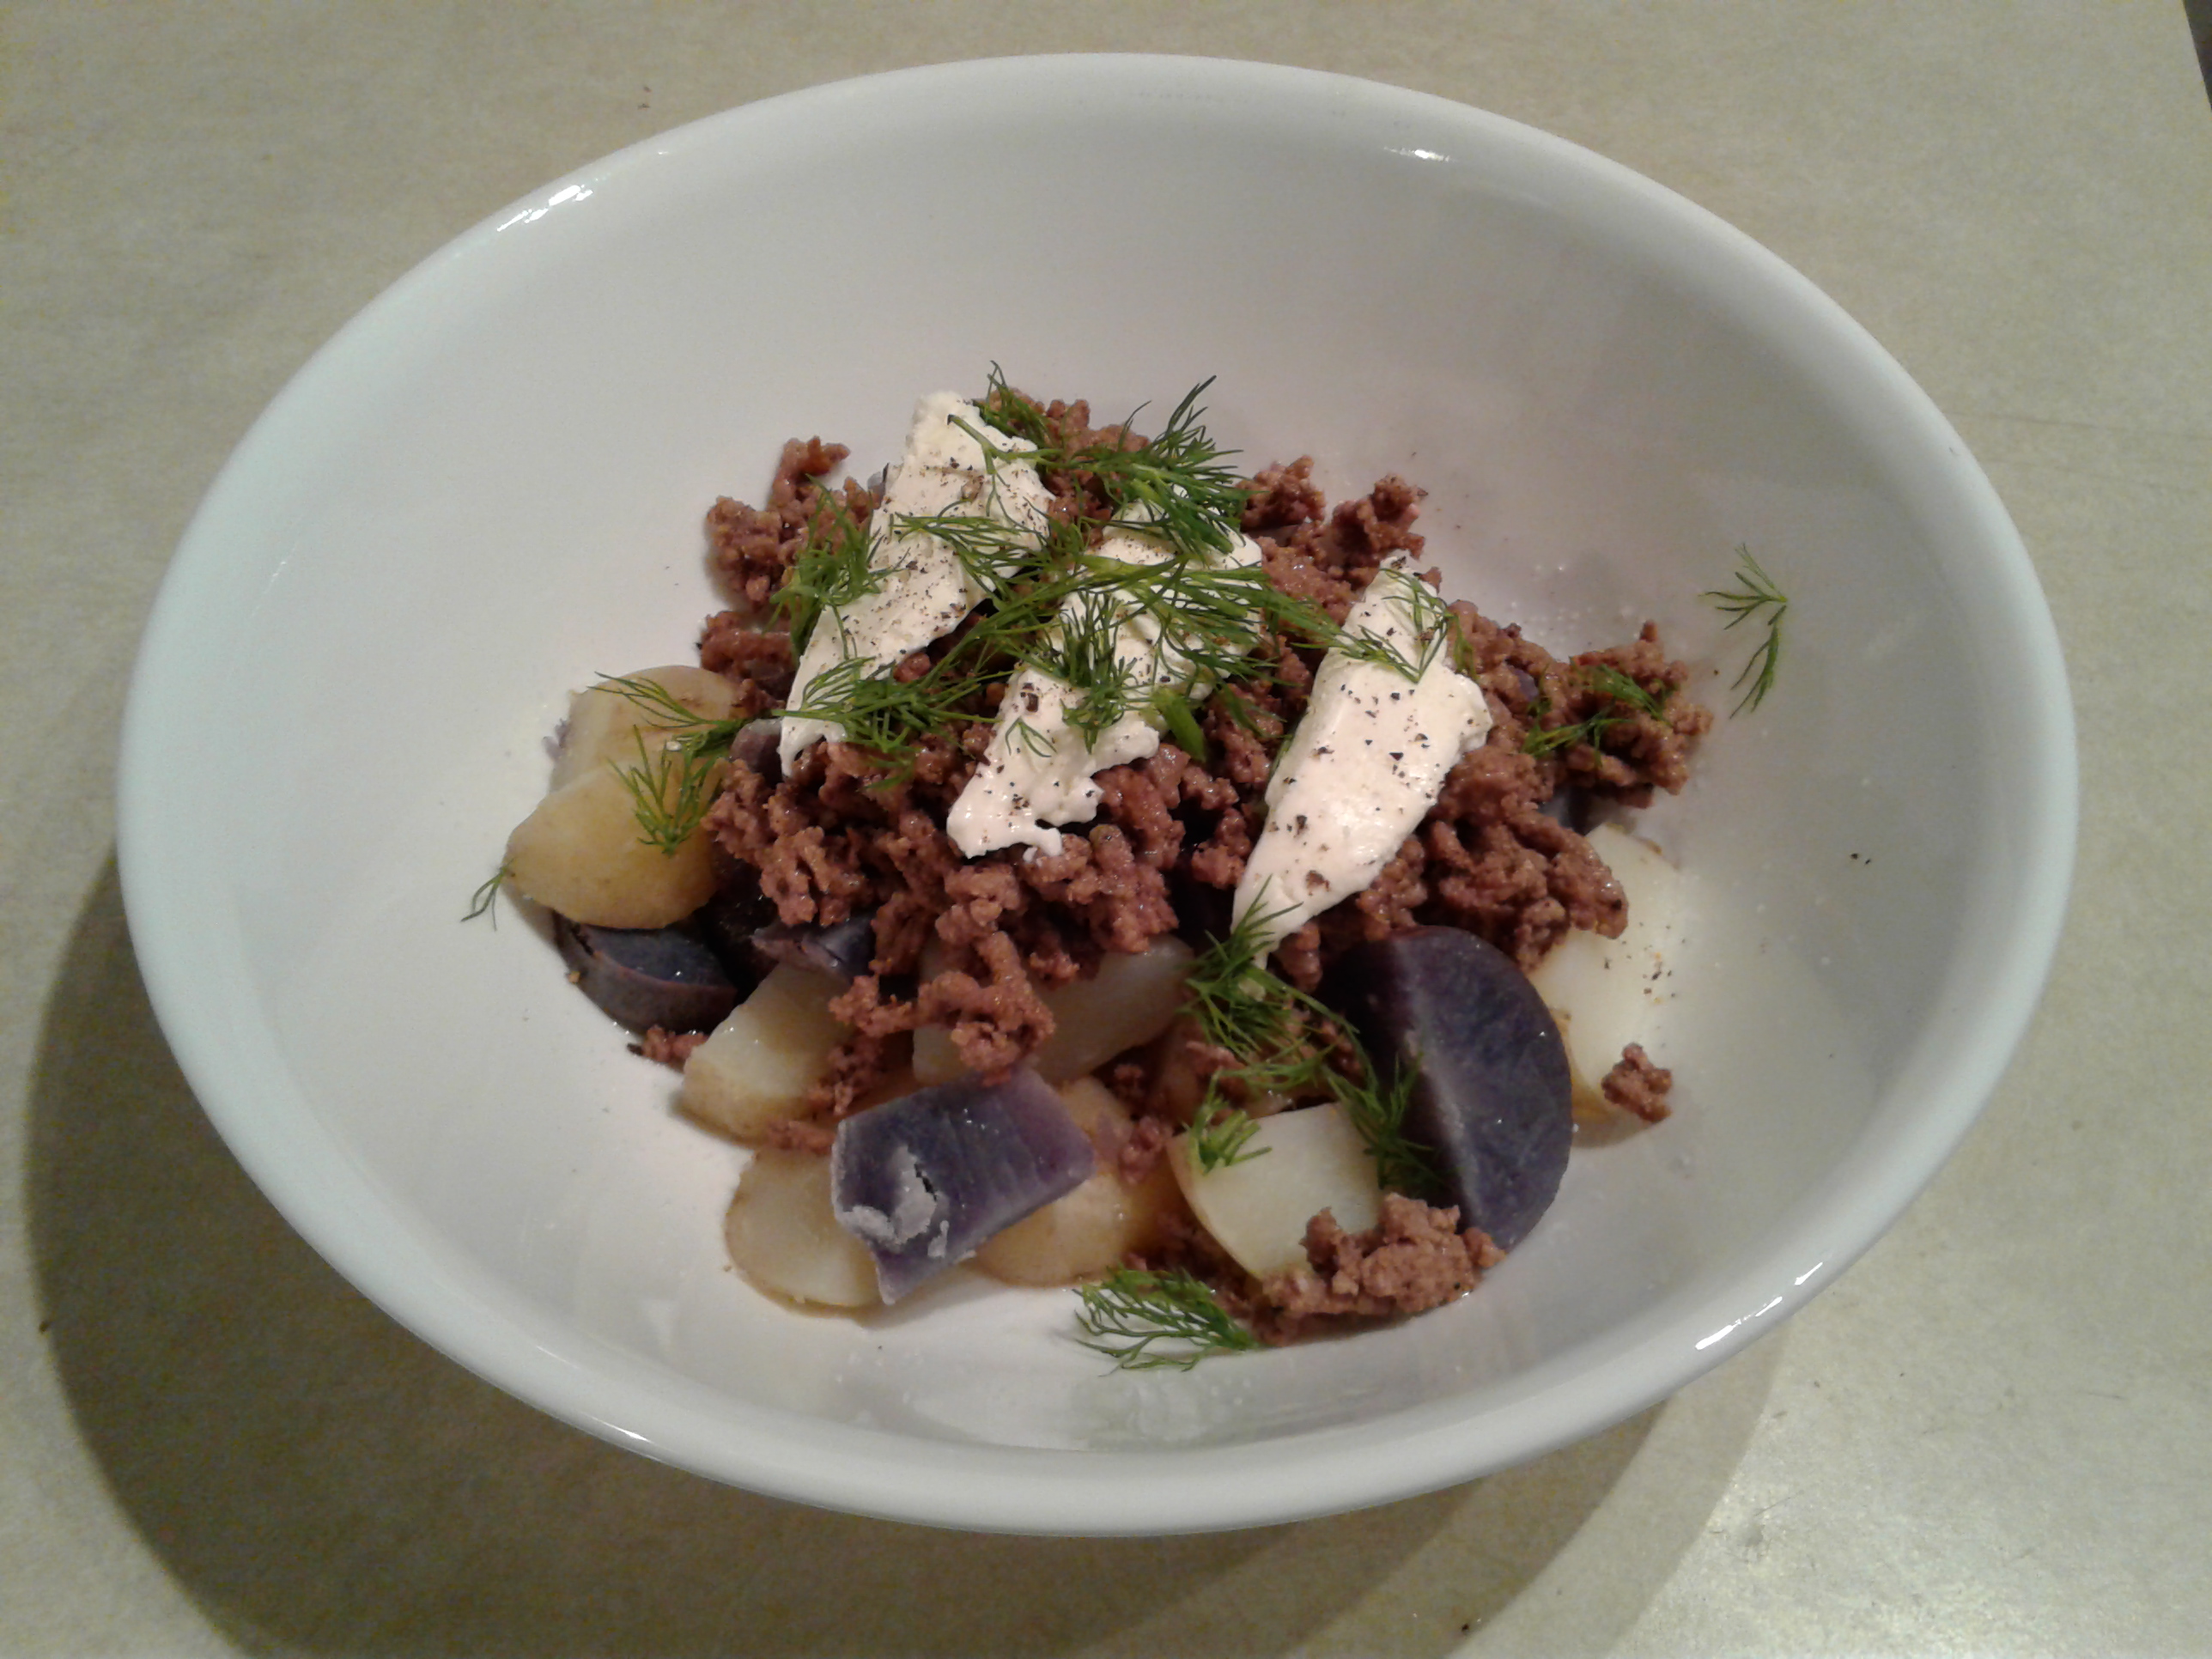 Boiled purple and white potatoes with ground beef and sour cream